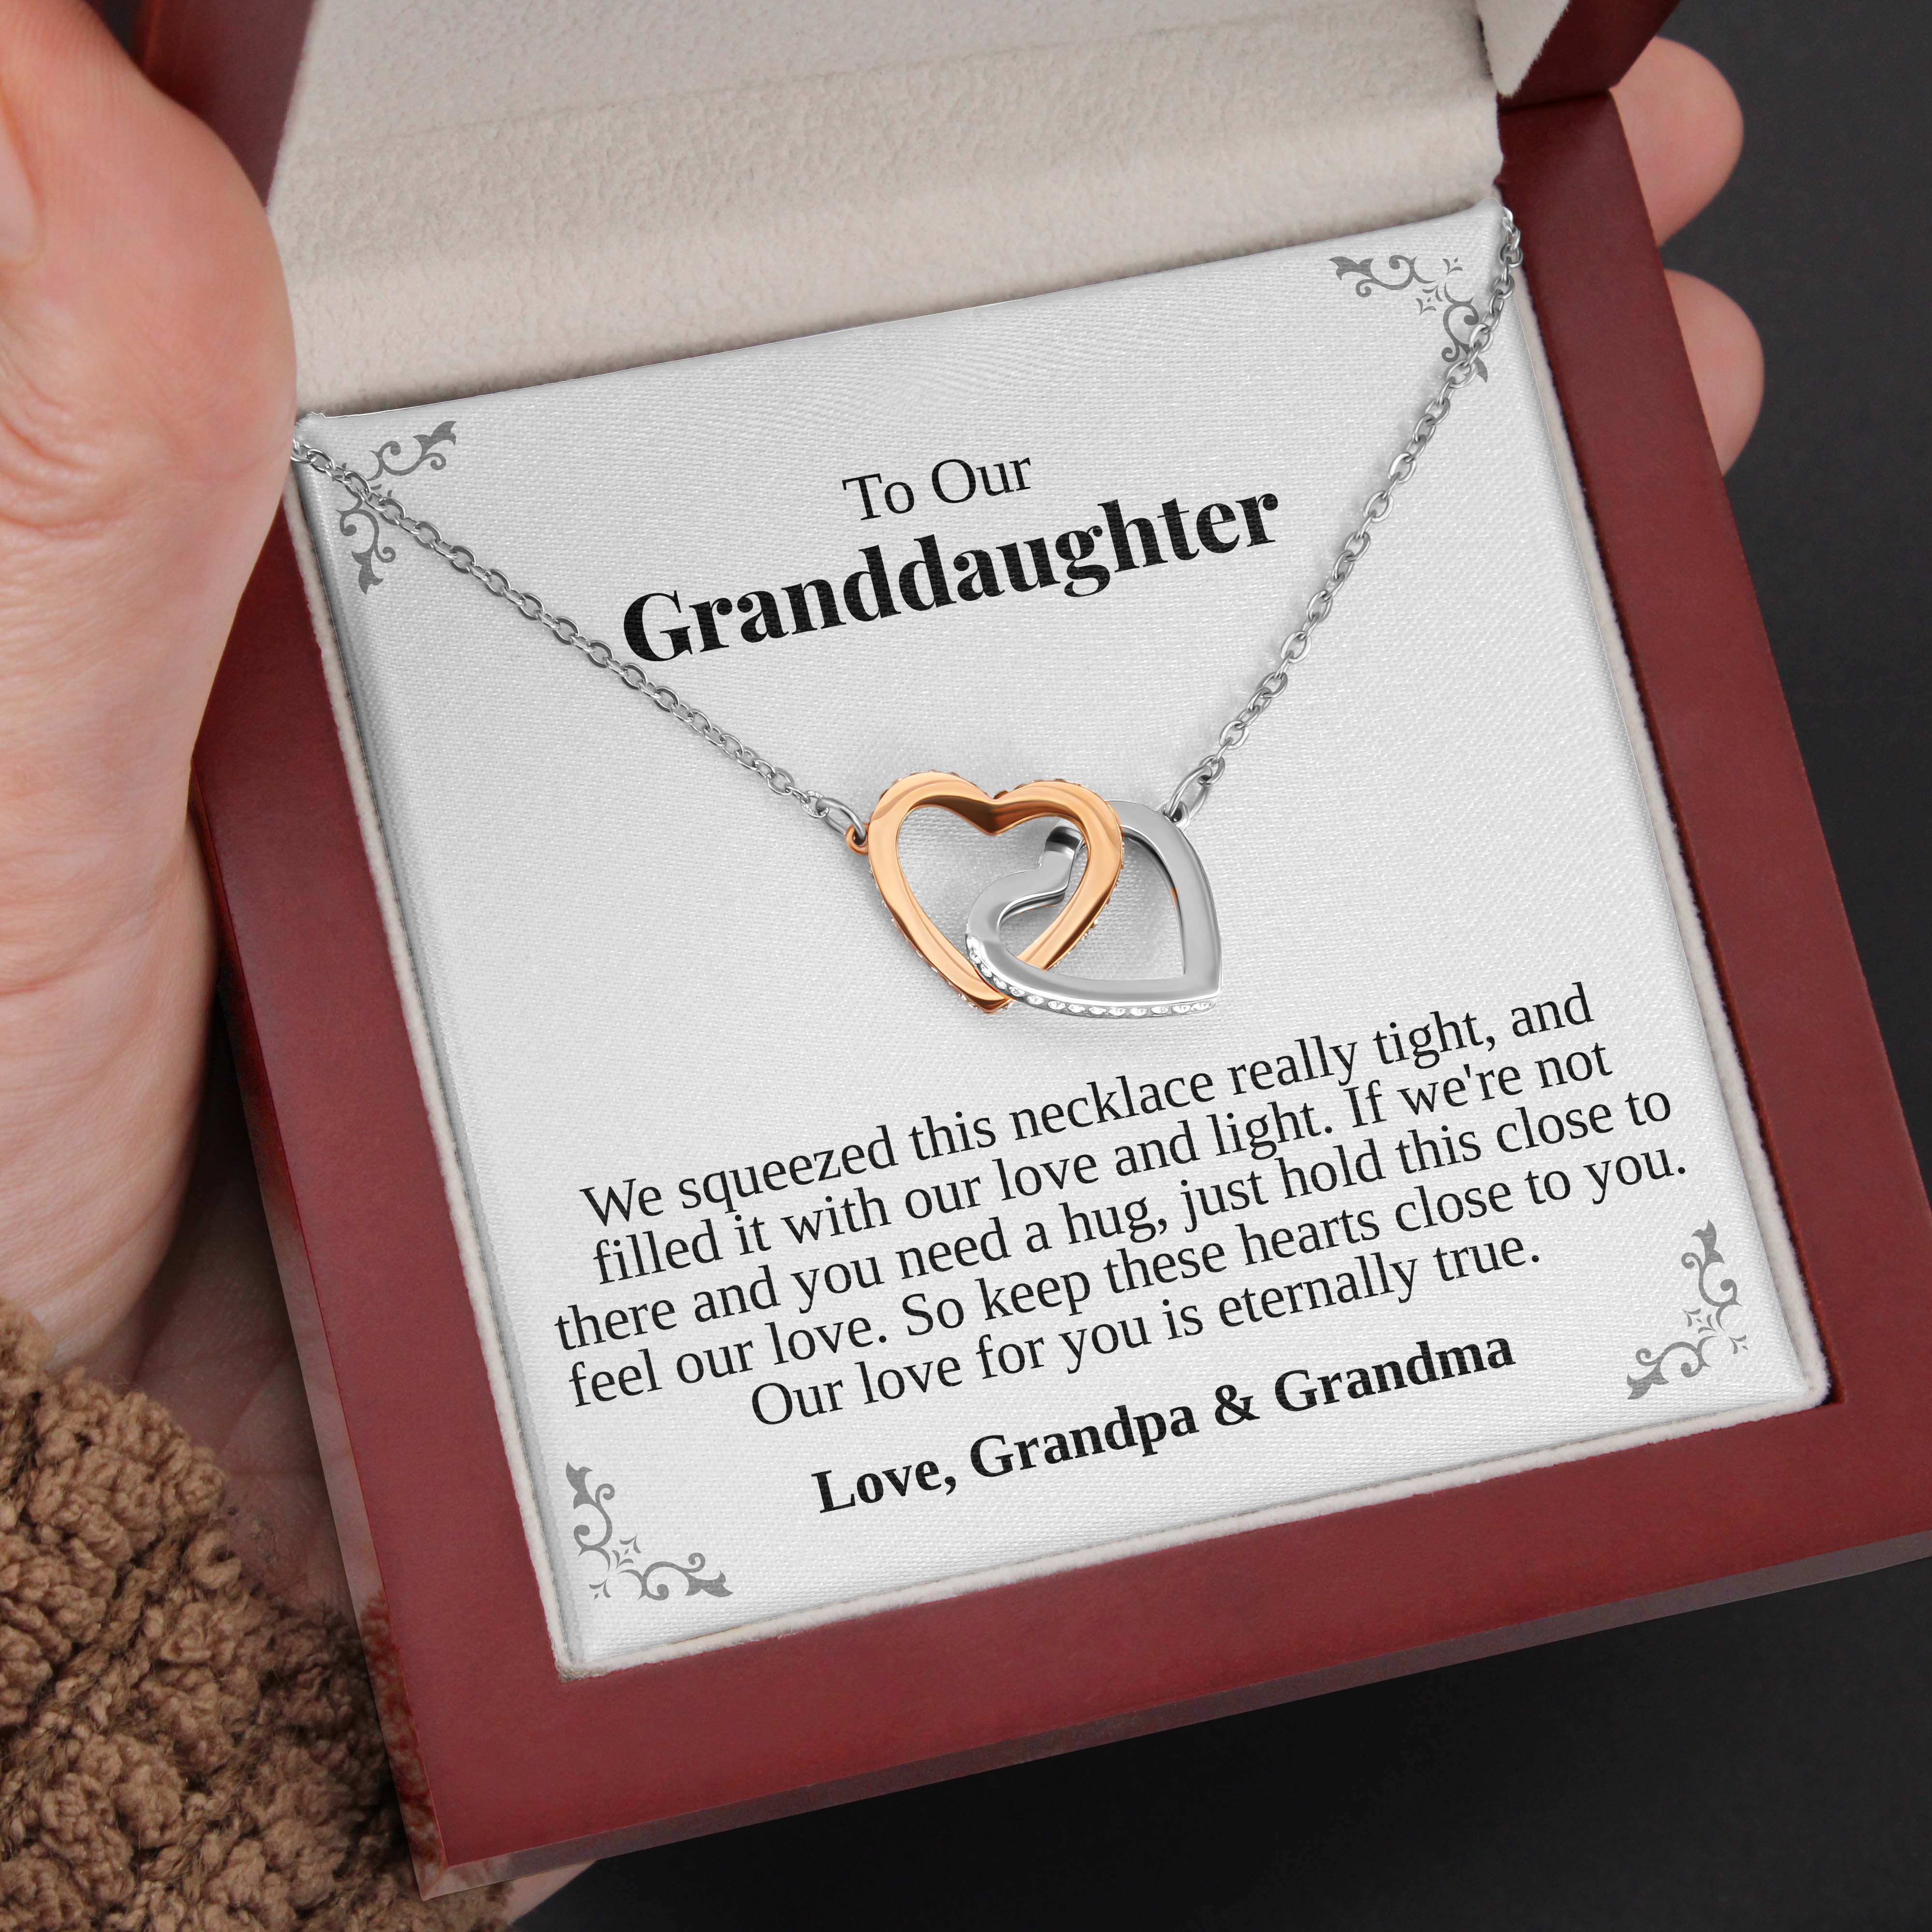 To Our Granddaughter | "Eternal Love" | Interlocking Hearts Necklace